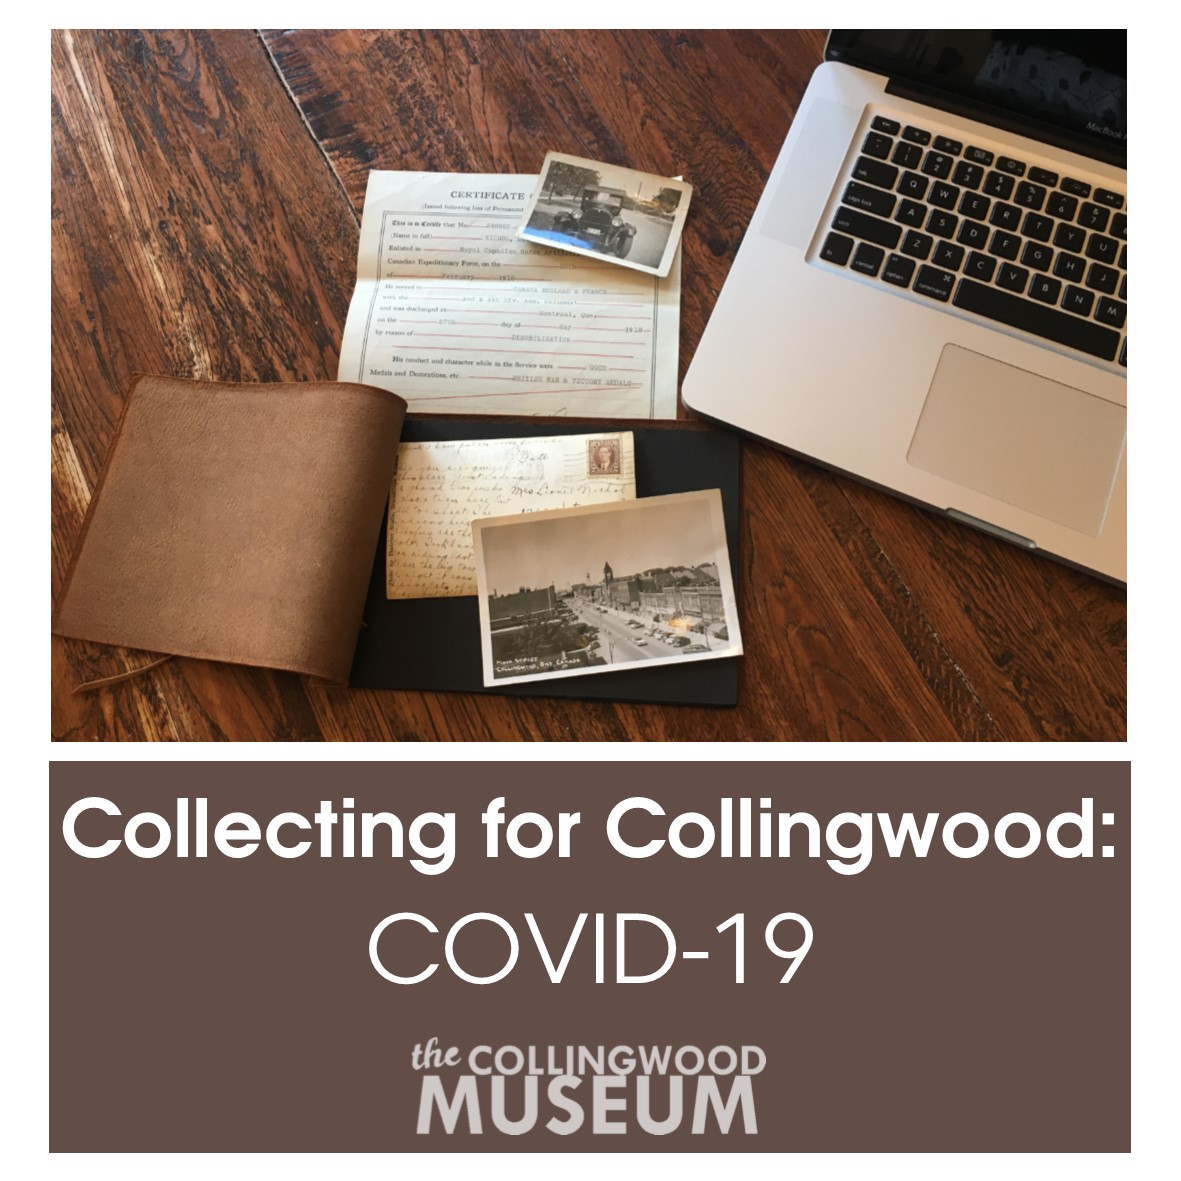 image of archival letters/photos with text below "Collecting for Collingwood: COVID-19"